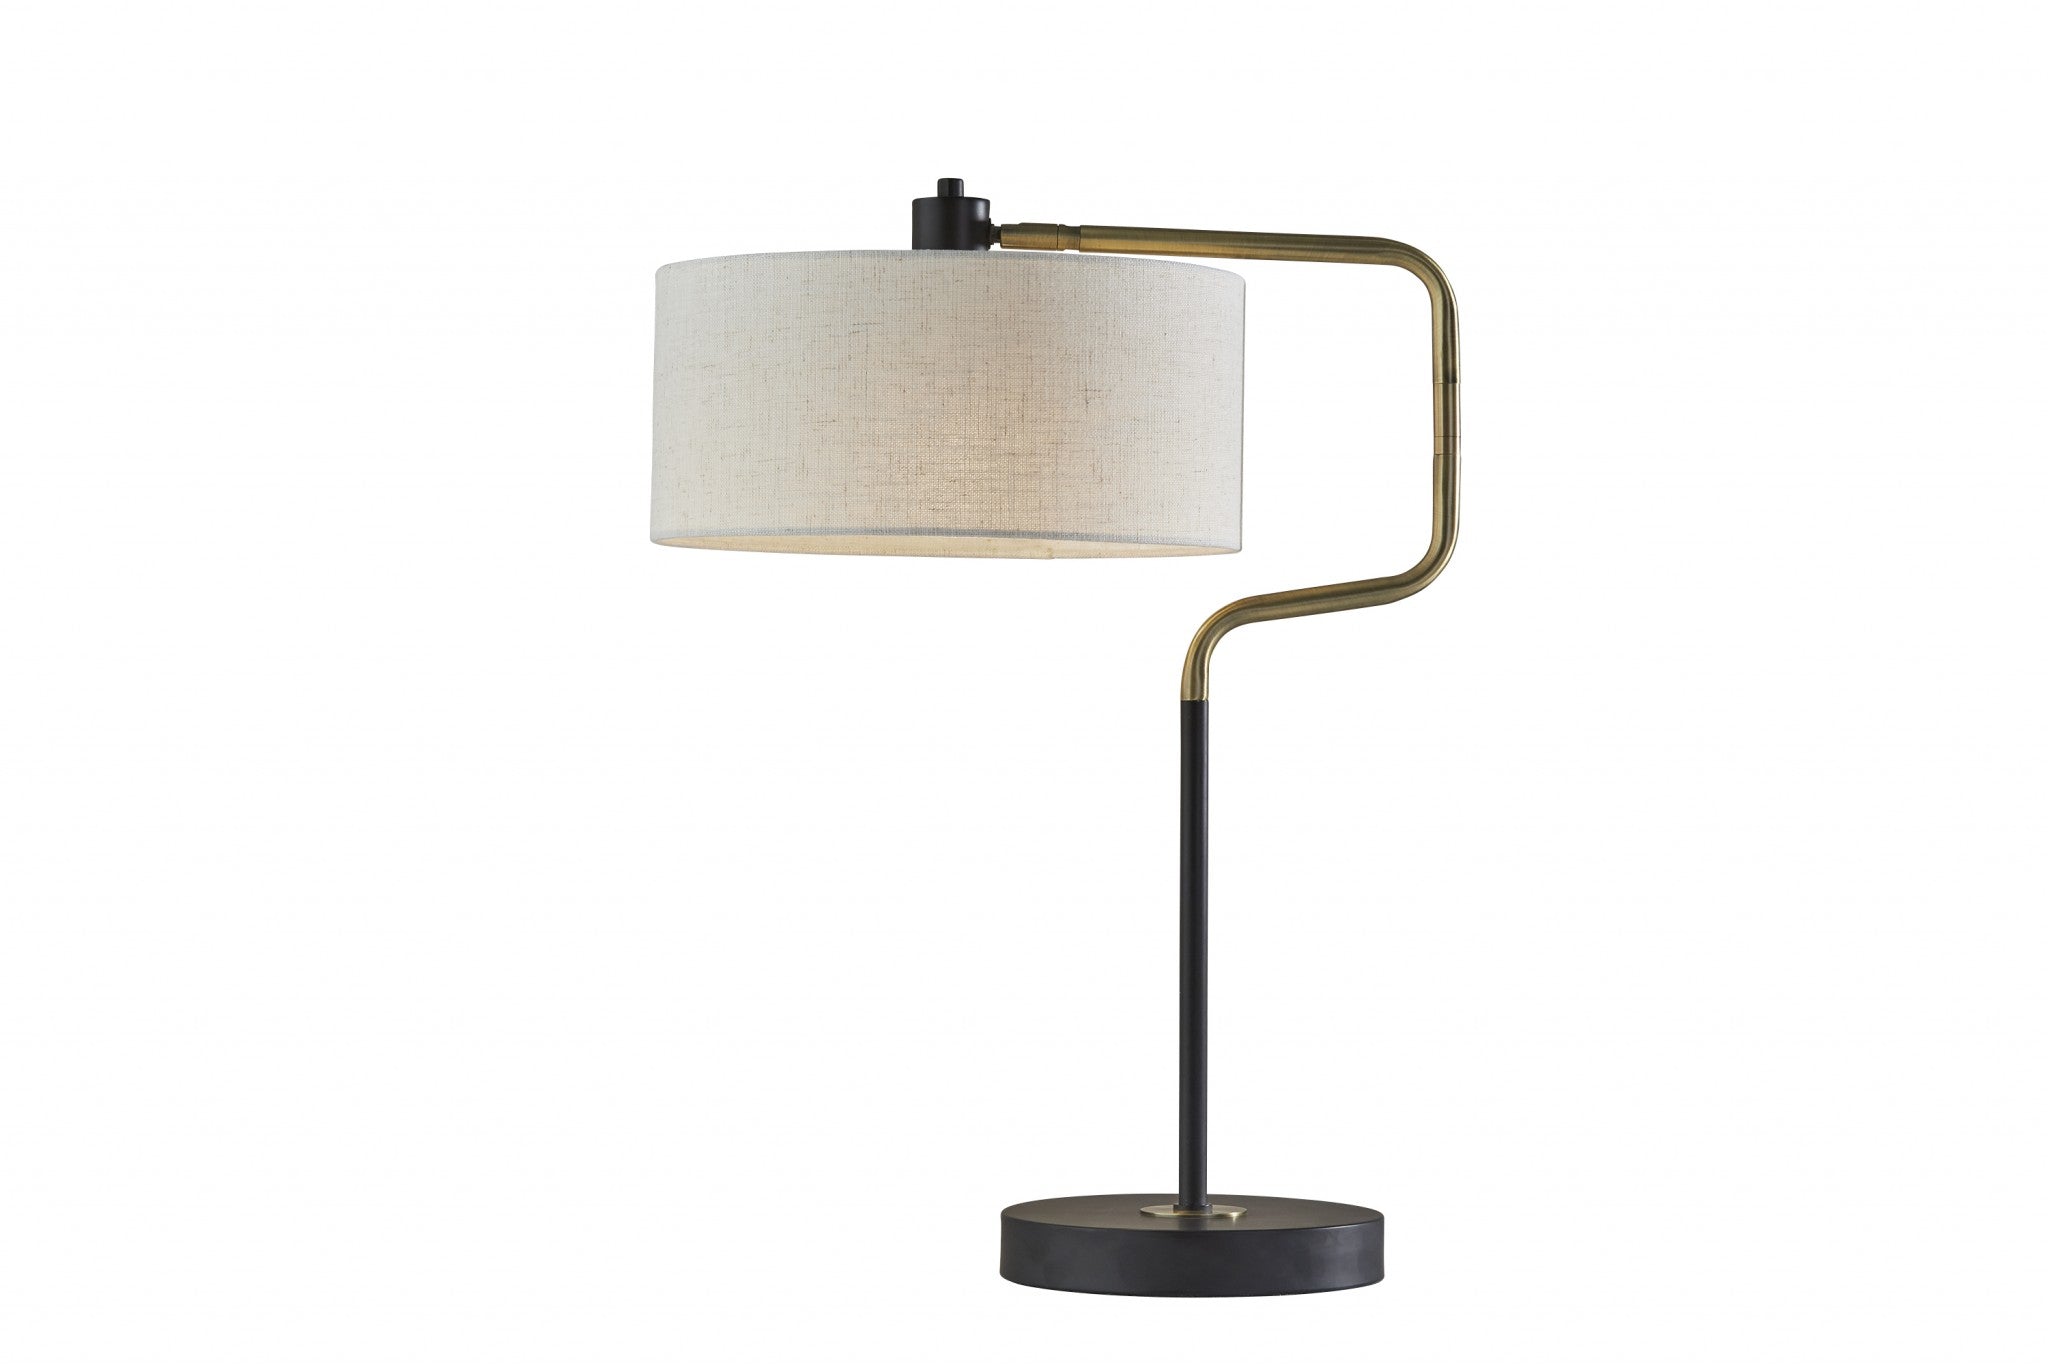 Black-Metal-With-Brass-Adjustable-Swing-Arm-And-Drum-Shade-Table-Lamp-Table-Lamps